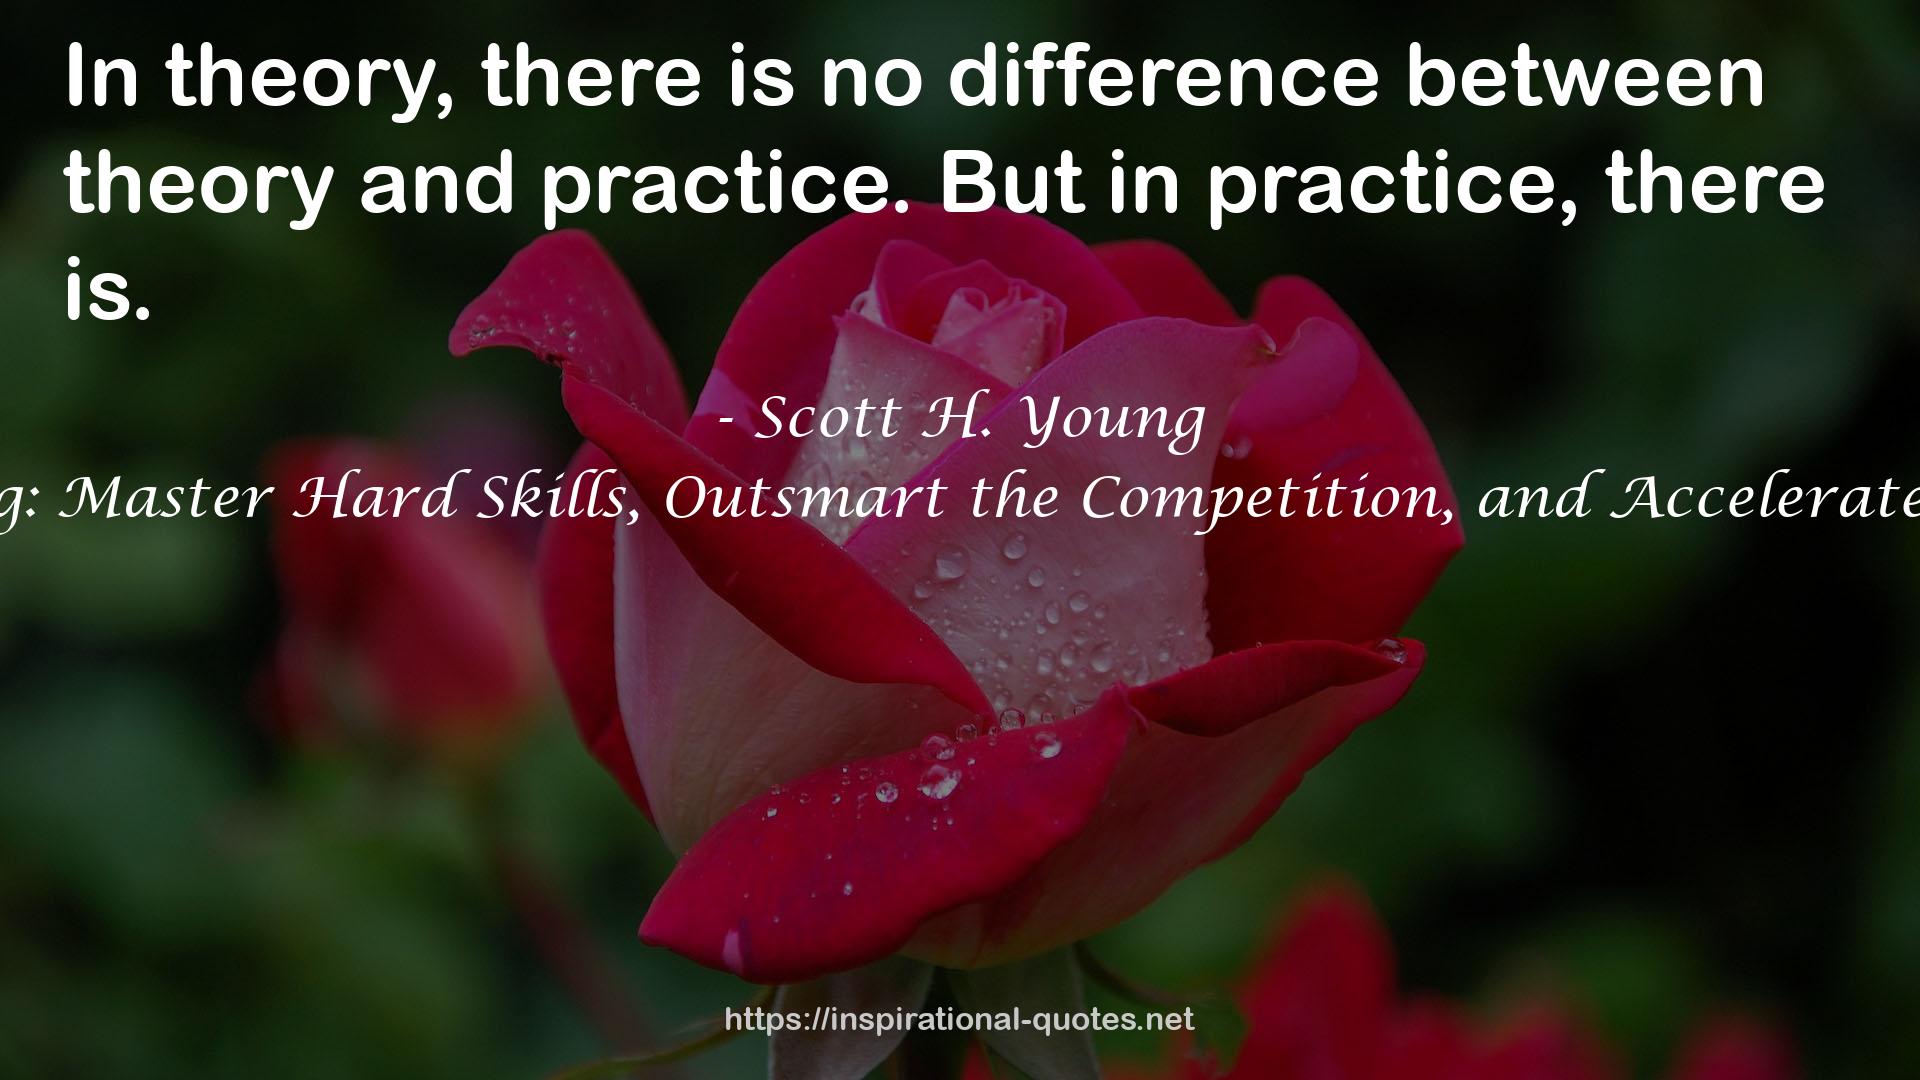 Scott H. Young QUOTES